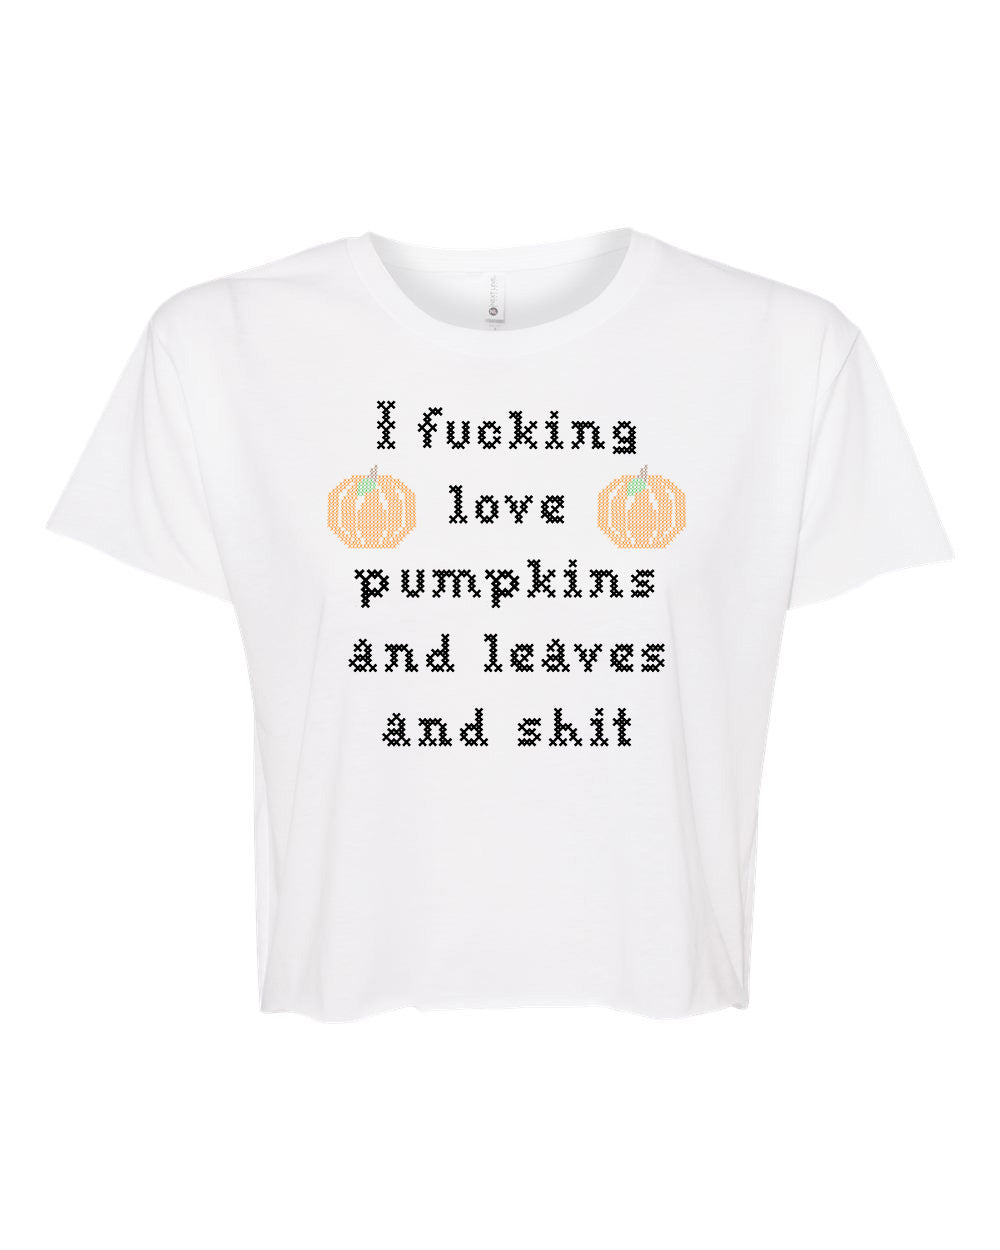 I Fucking Love Pumpkins And Leaves And Shit - Cross Stitch Design - Women's Crop Tee - White